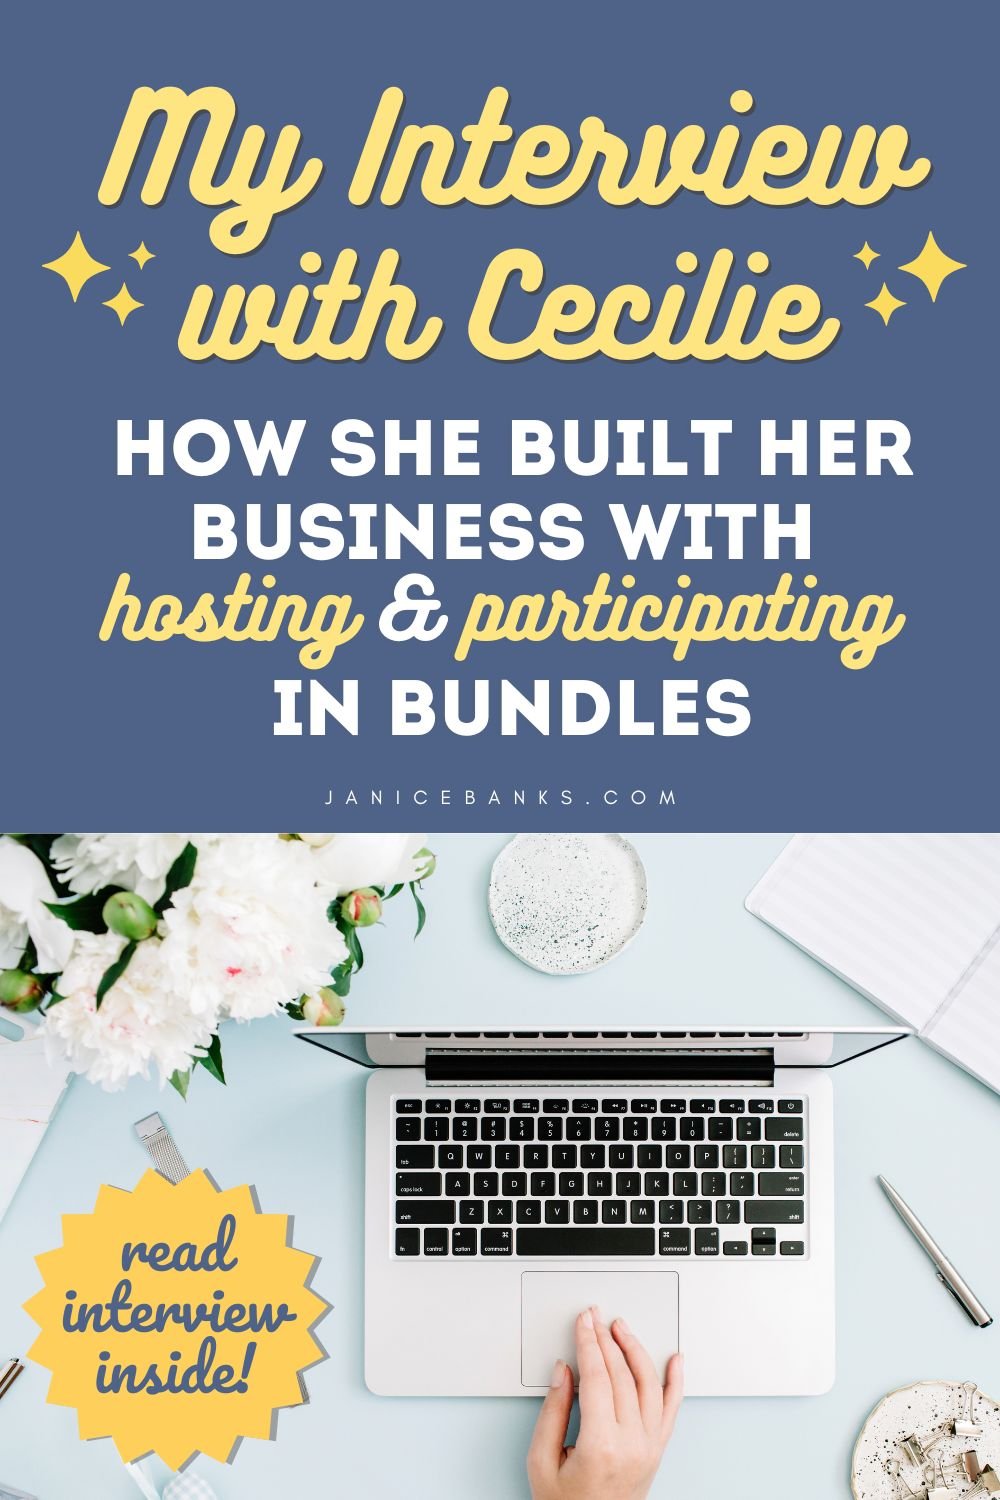 My Interview with Cecilie - How she built her business with bundles